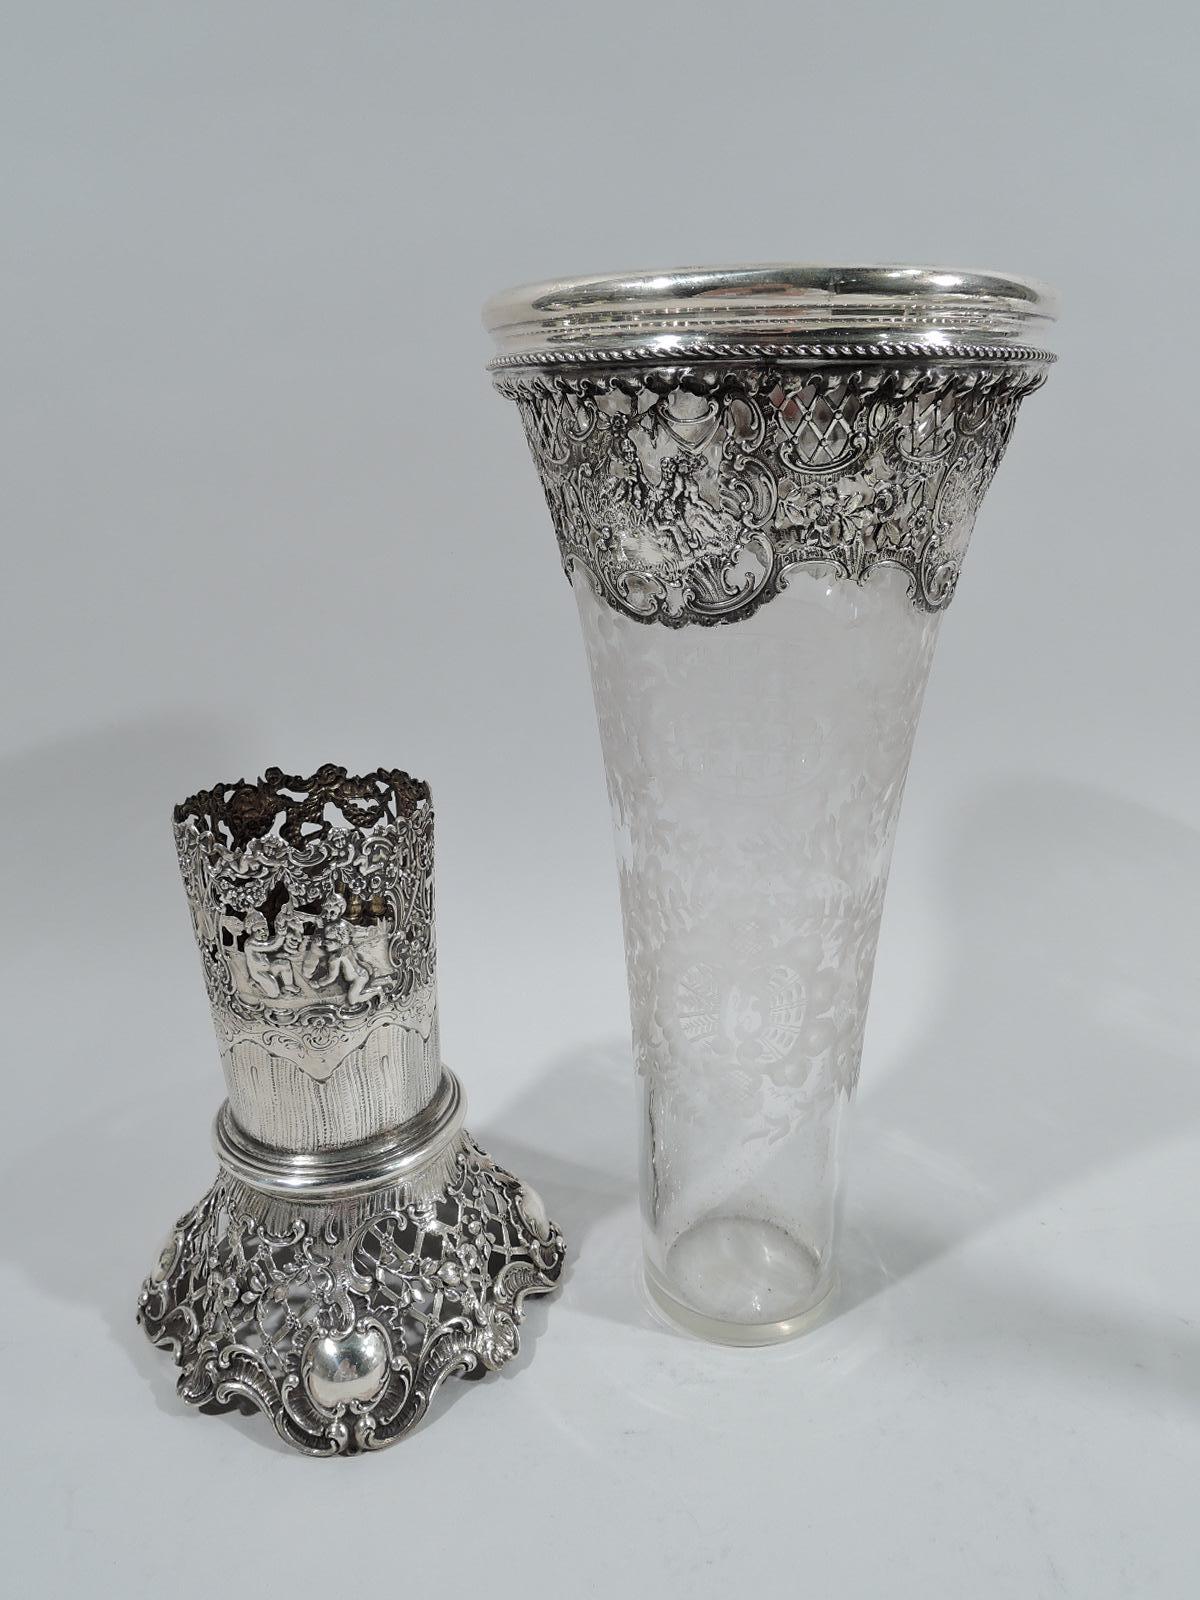 German 800 silver and glass vase, ca 1910. Tapering trumpet-form in clear glass with acid-etched wreaths, scrolls, and flowers. At top pierced and chased 800 silver mount with cherubs, flowers, and scrolls. Detachable 800 silver base with spread